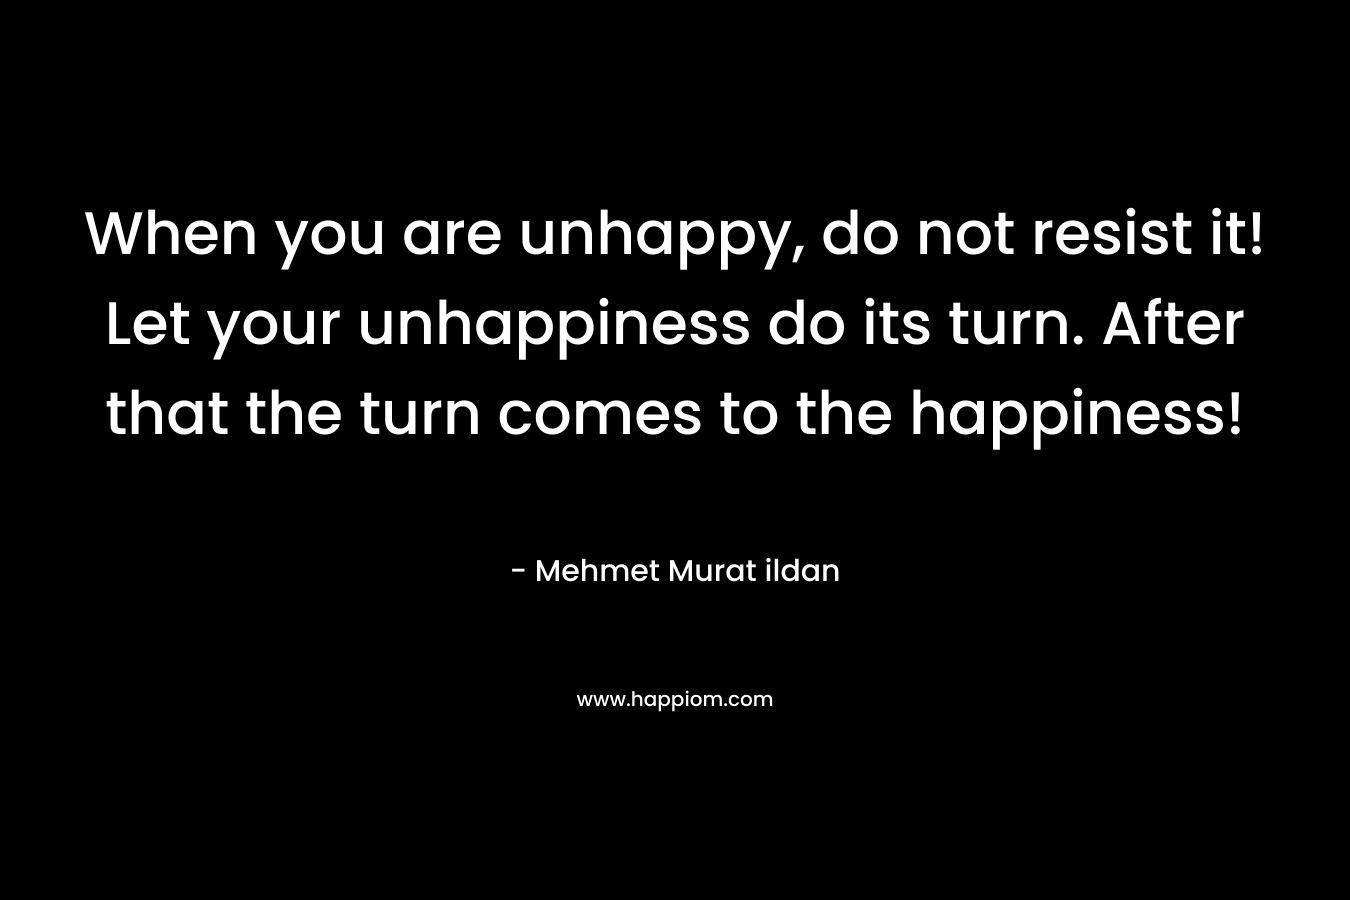 When you are unhappy, do not resist it! Let your unhappiness do its turn. After that the turn comes to the happiness!